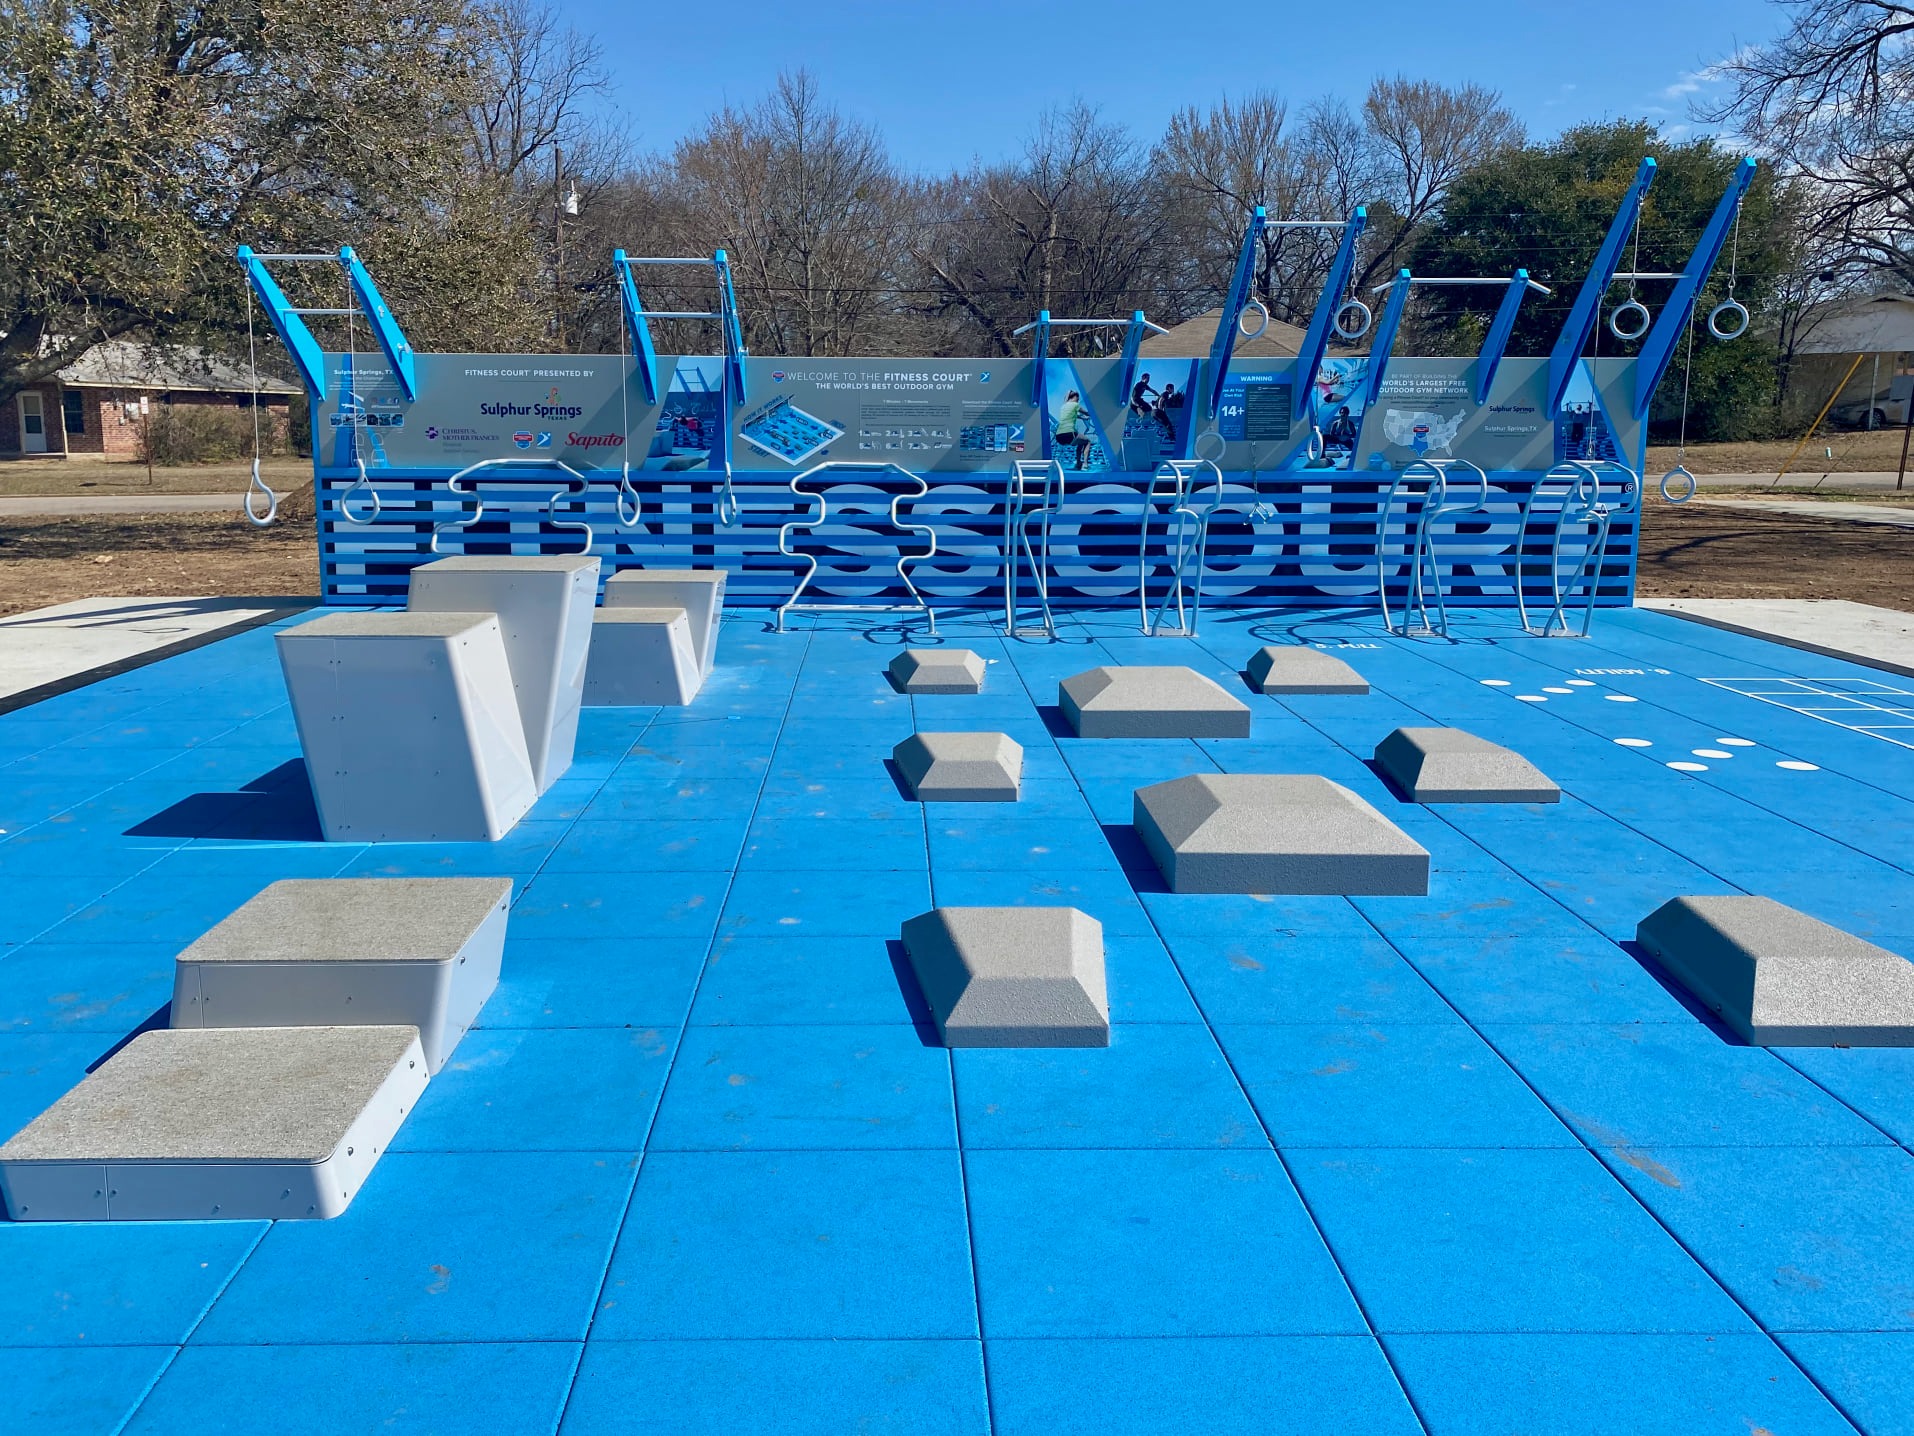 Pacific Park to inaugurate world’s largest outdoor gym installation